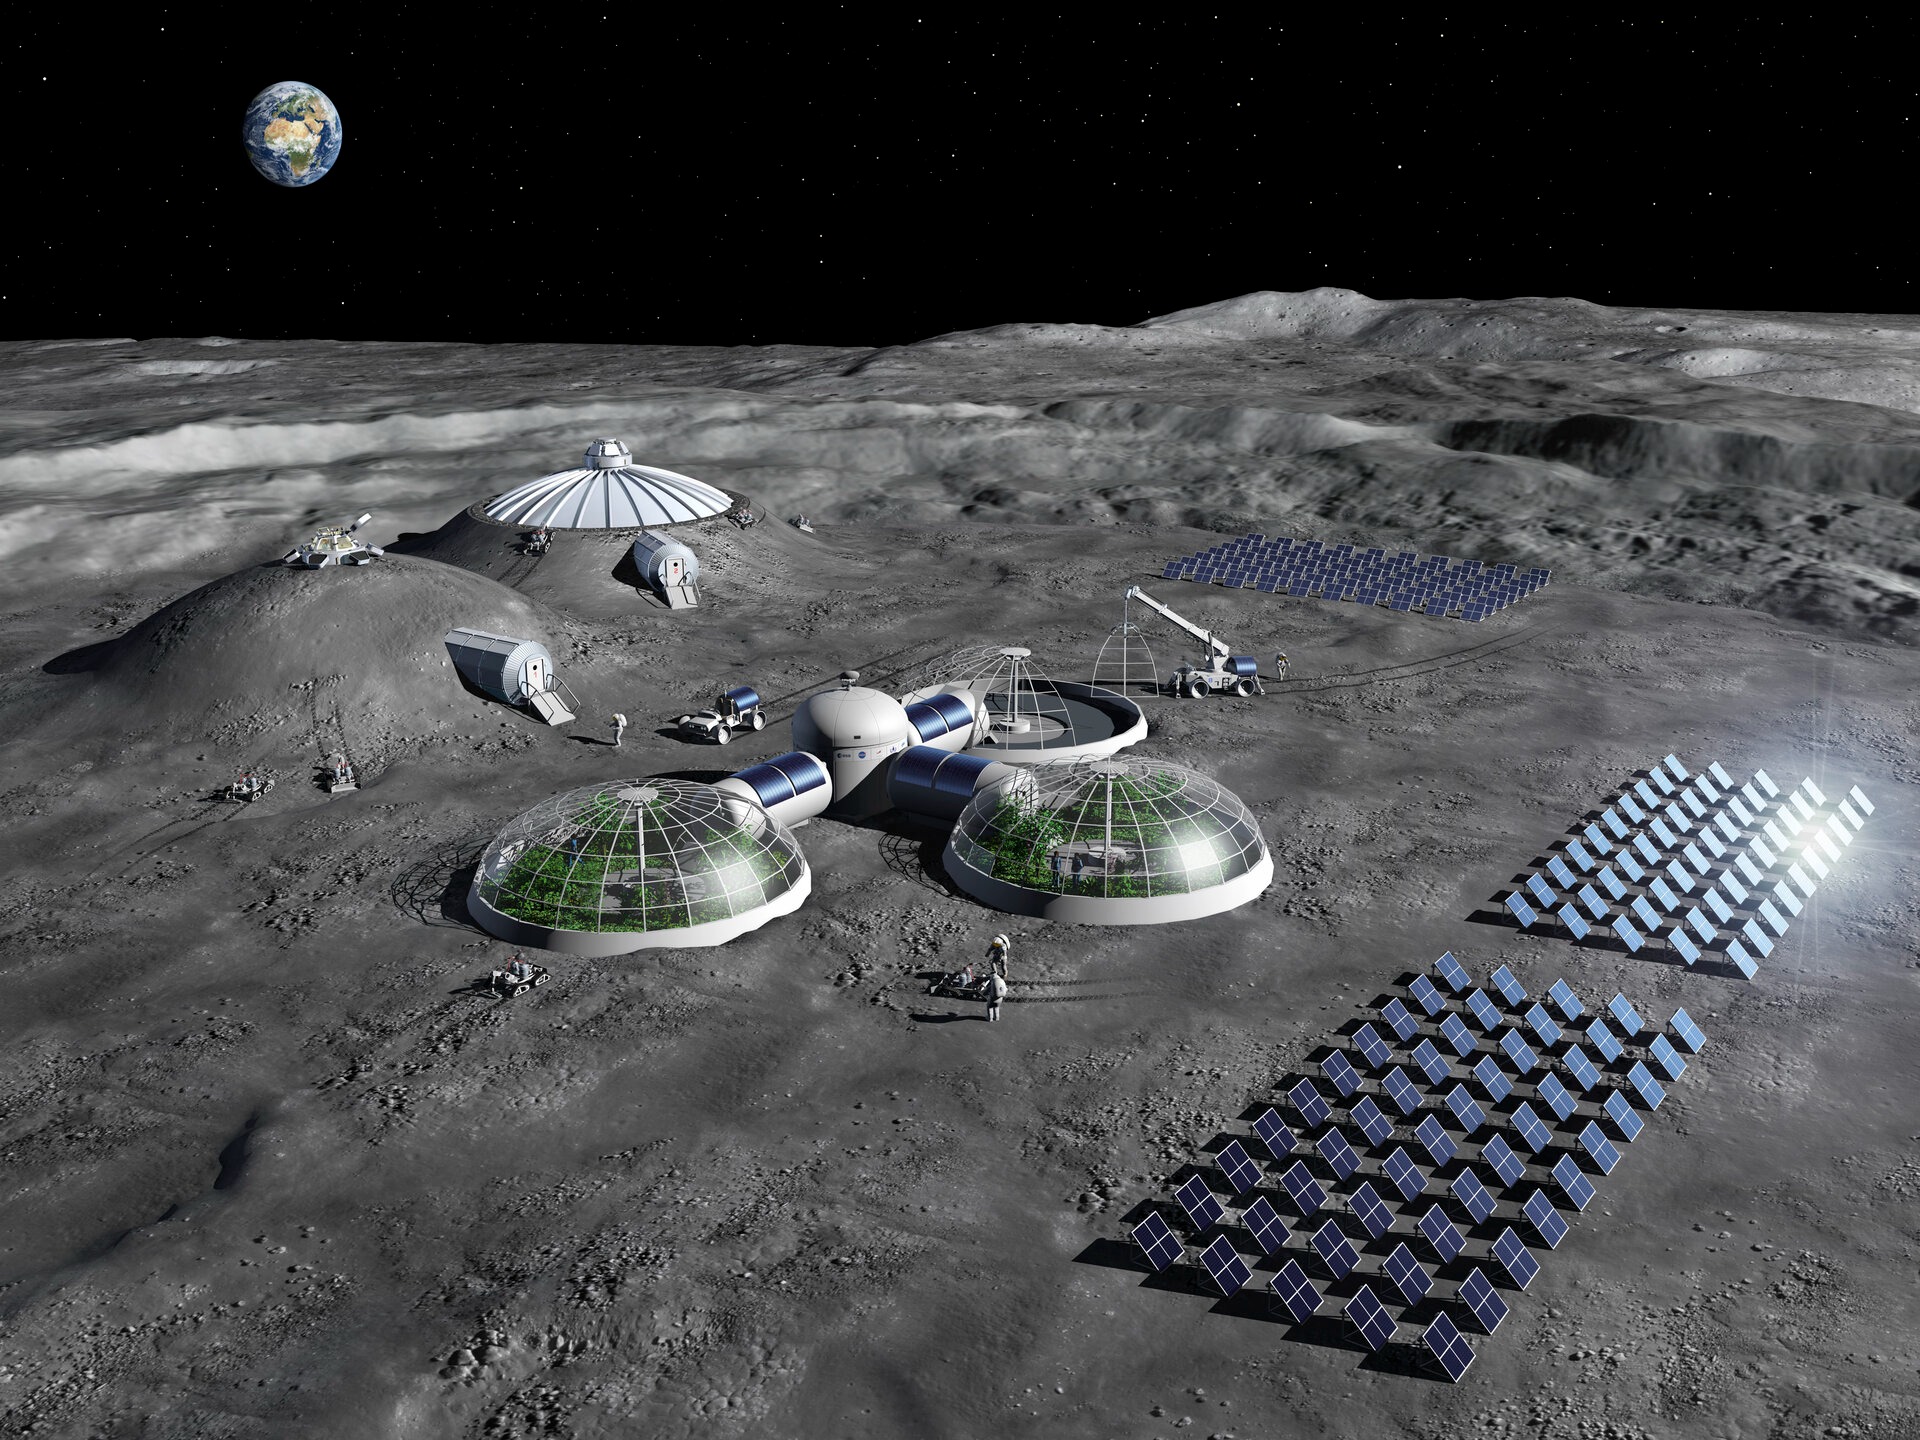 This artist's impression of a lunar base shows solar arrays for power generation, greenhouses for food production, and protected habitats with regolith.  ESA credit.